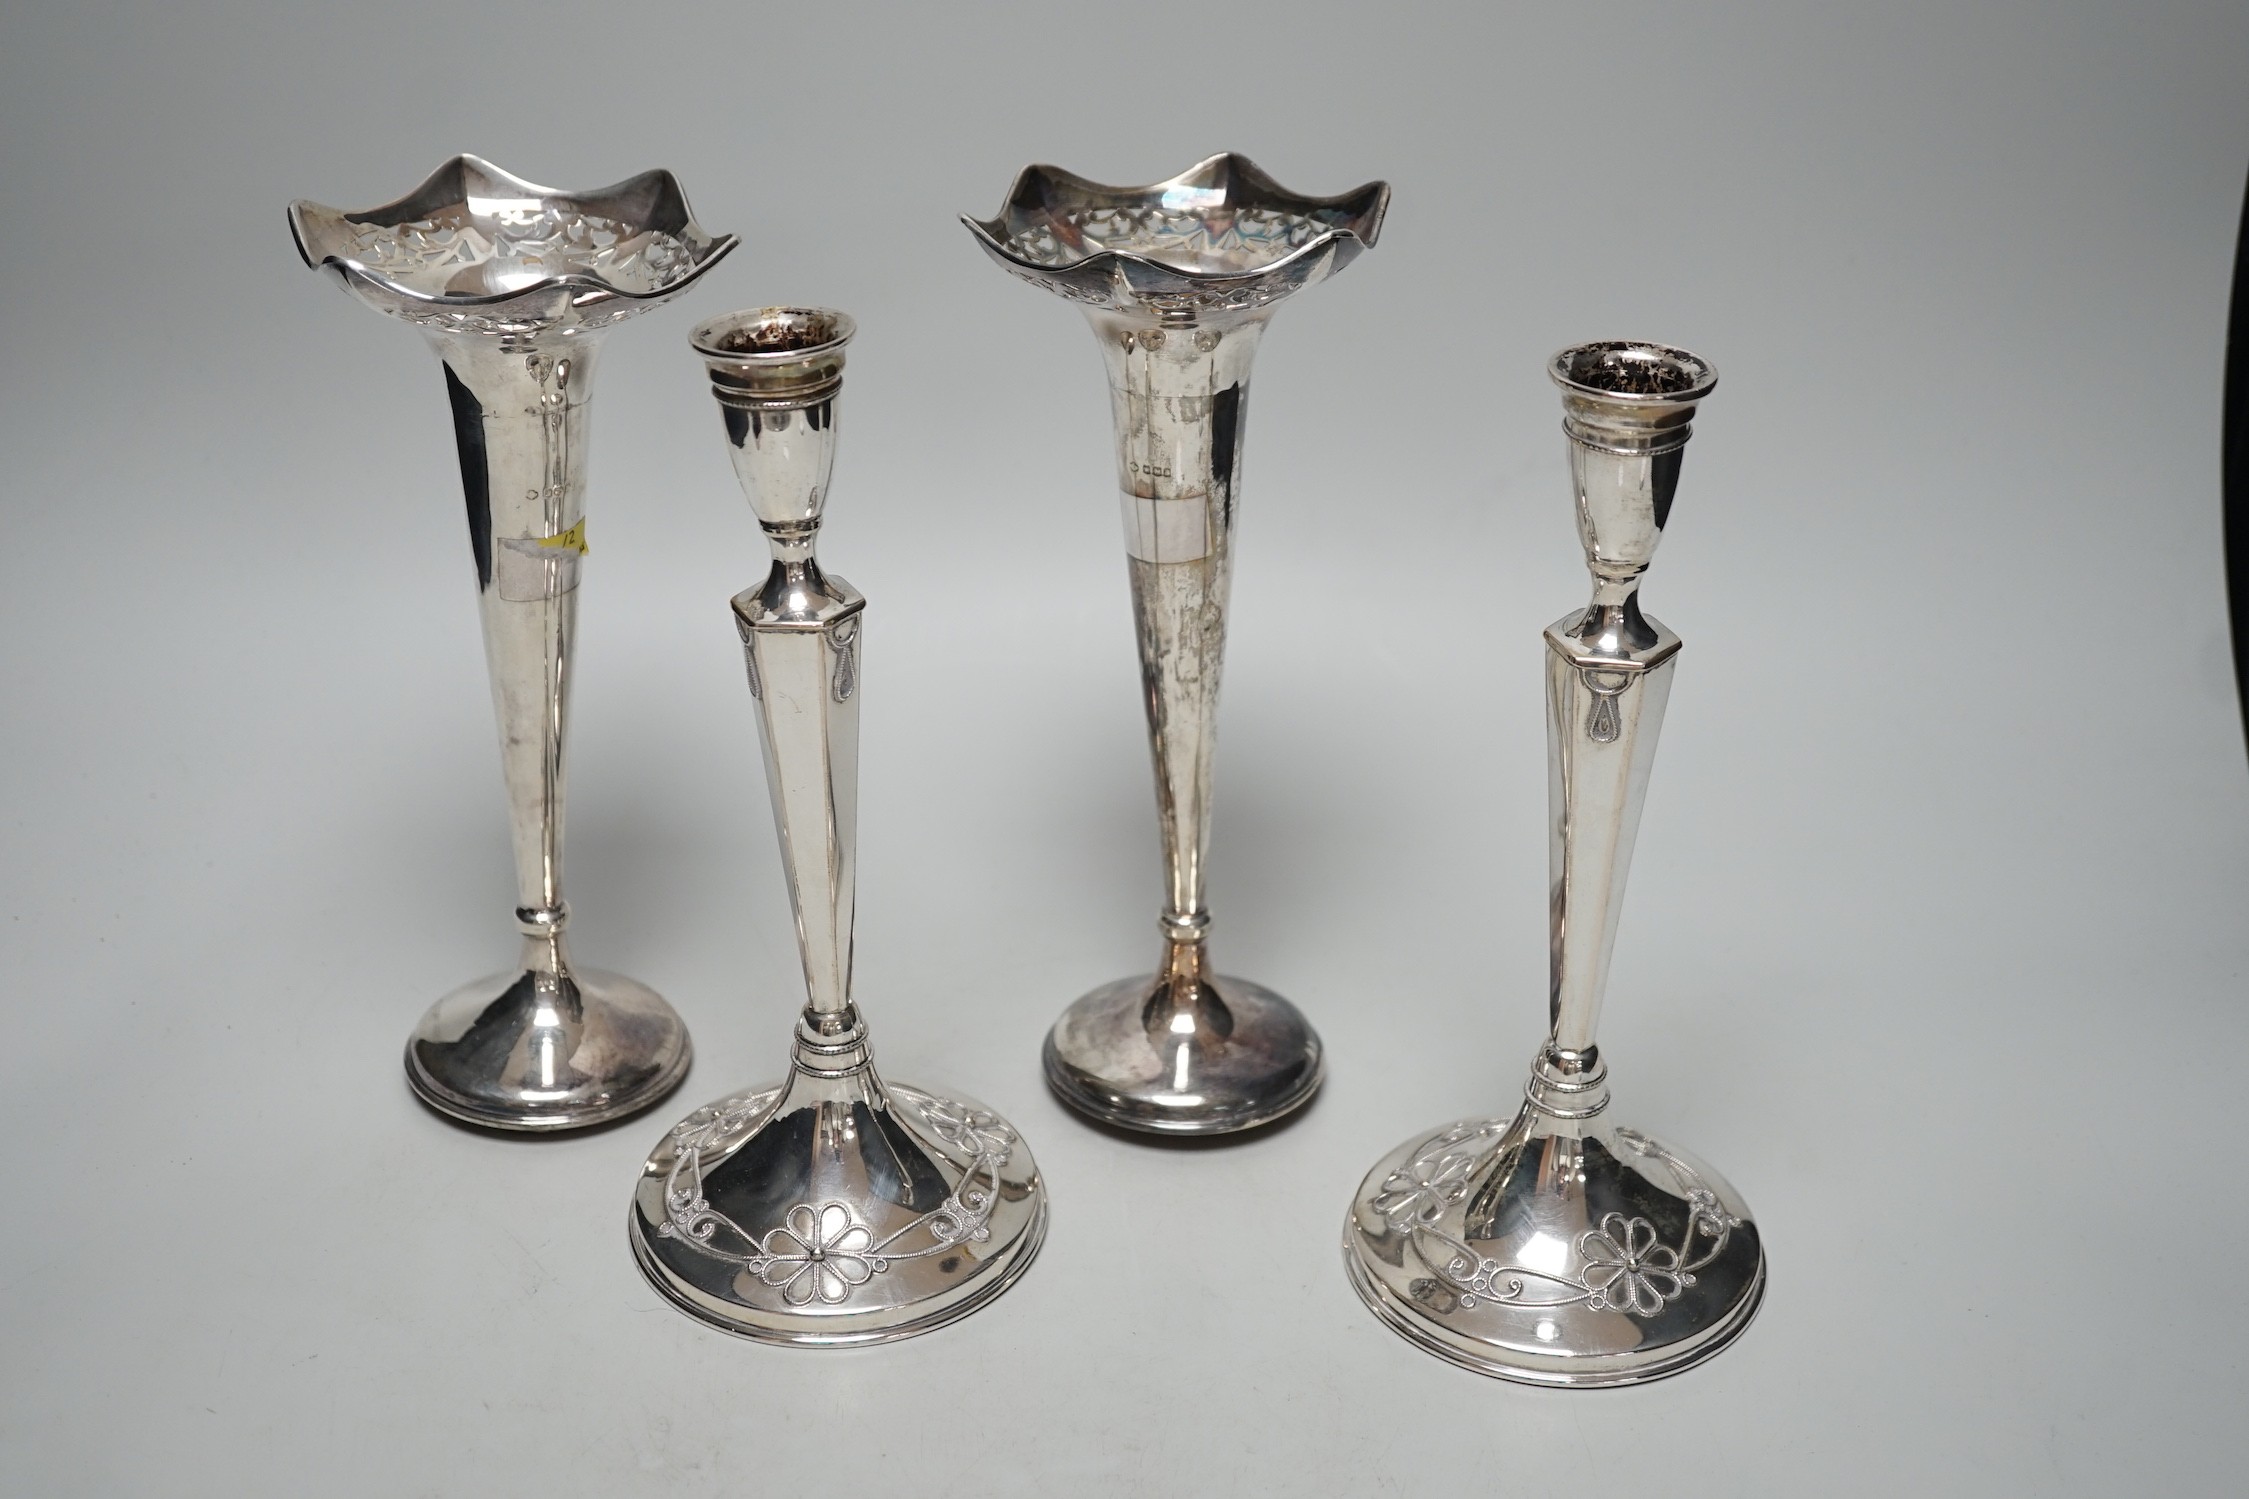 A pair of George V silver mounted posy vases, 22.3cm, weighted and a pair of German 800 standard white metal mounted candlesticks, weighted.